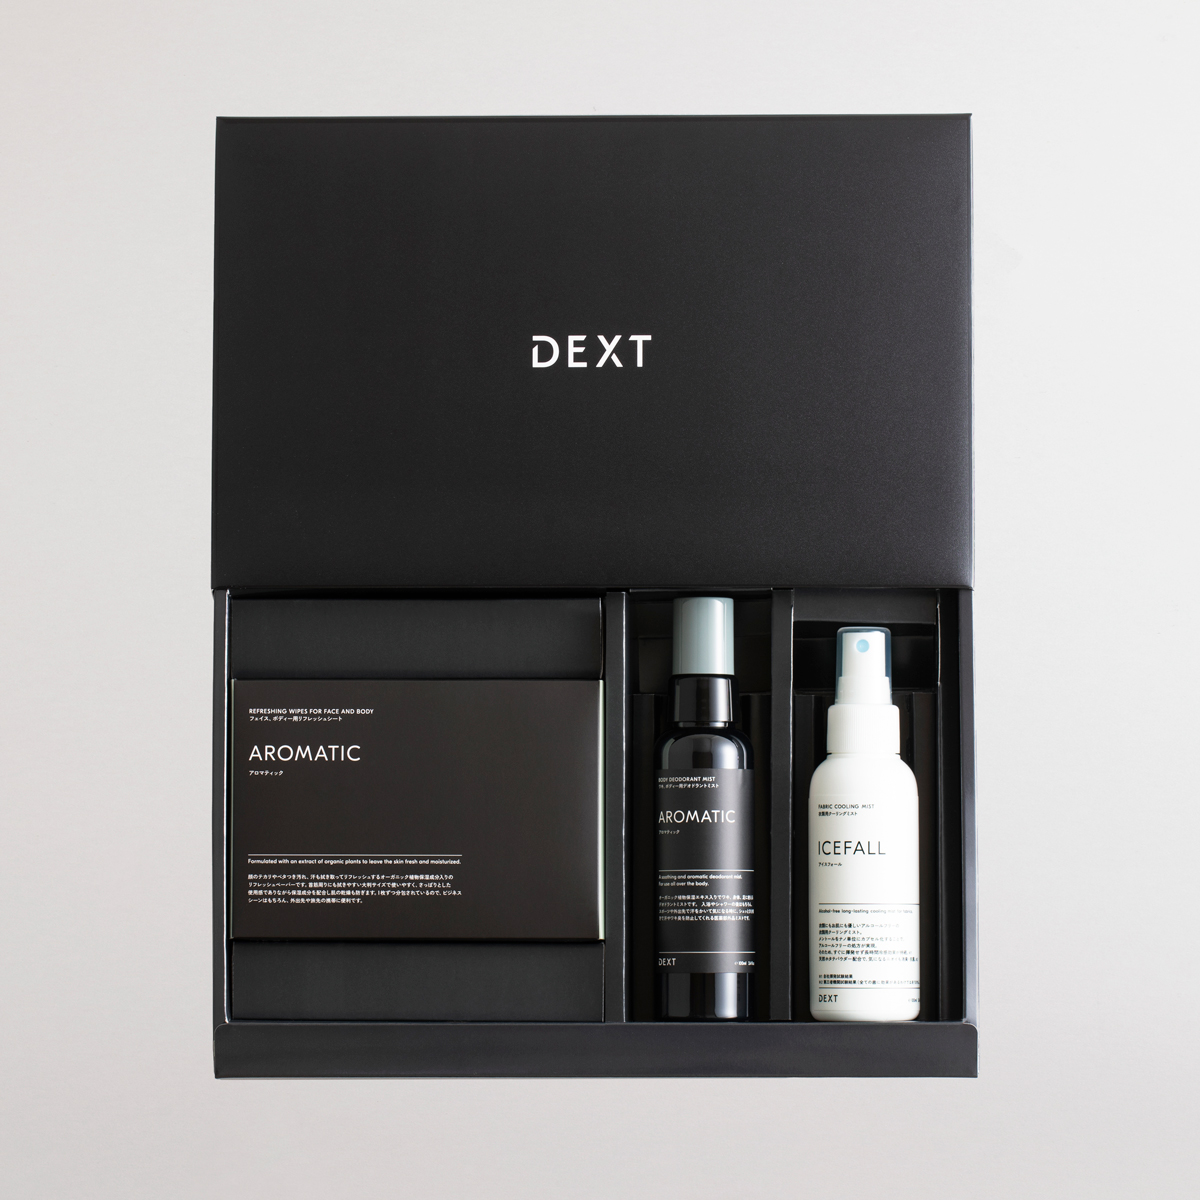 DEXT REFRESHING WIPES FOR FACE AND BODY (AROMATIC) & BODY DEODORANT MIST & FABRIC COOLING MIST